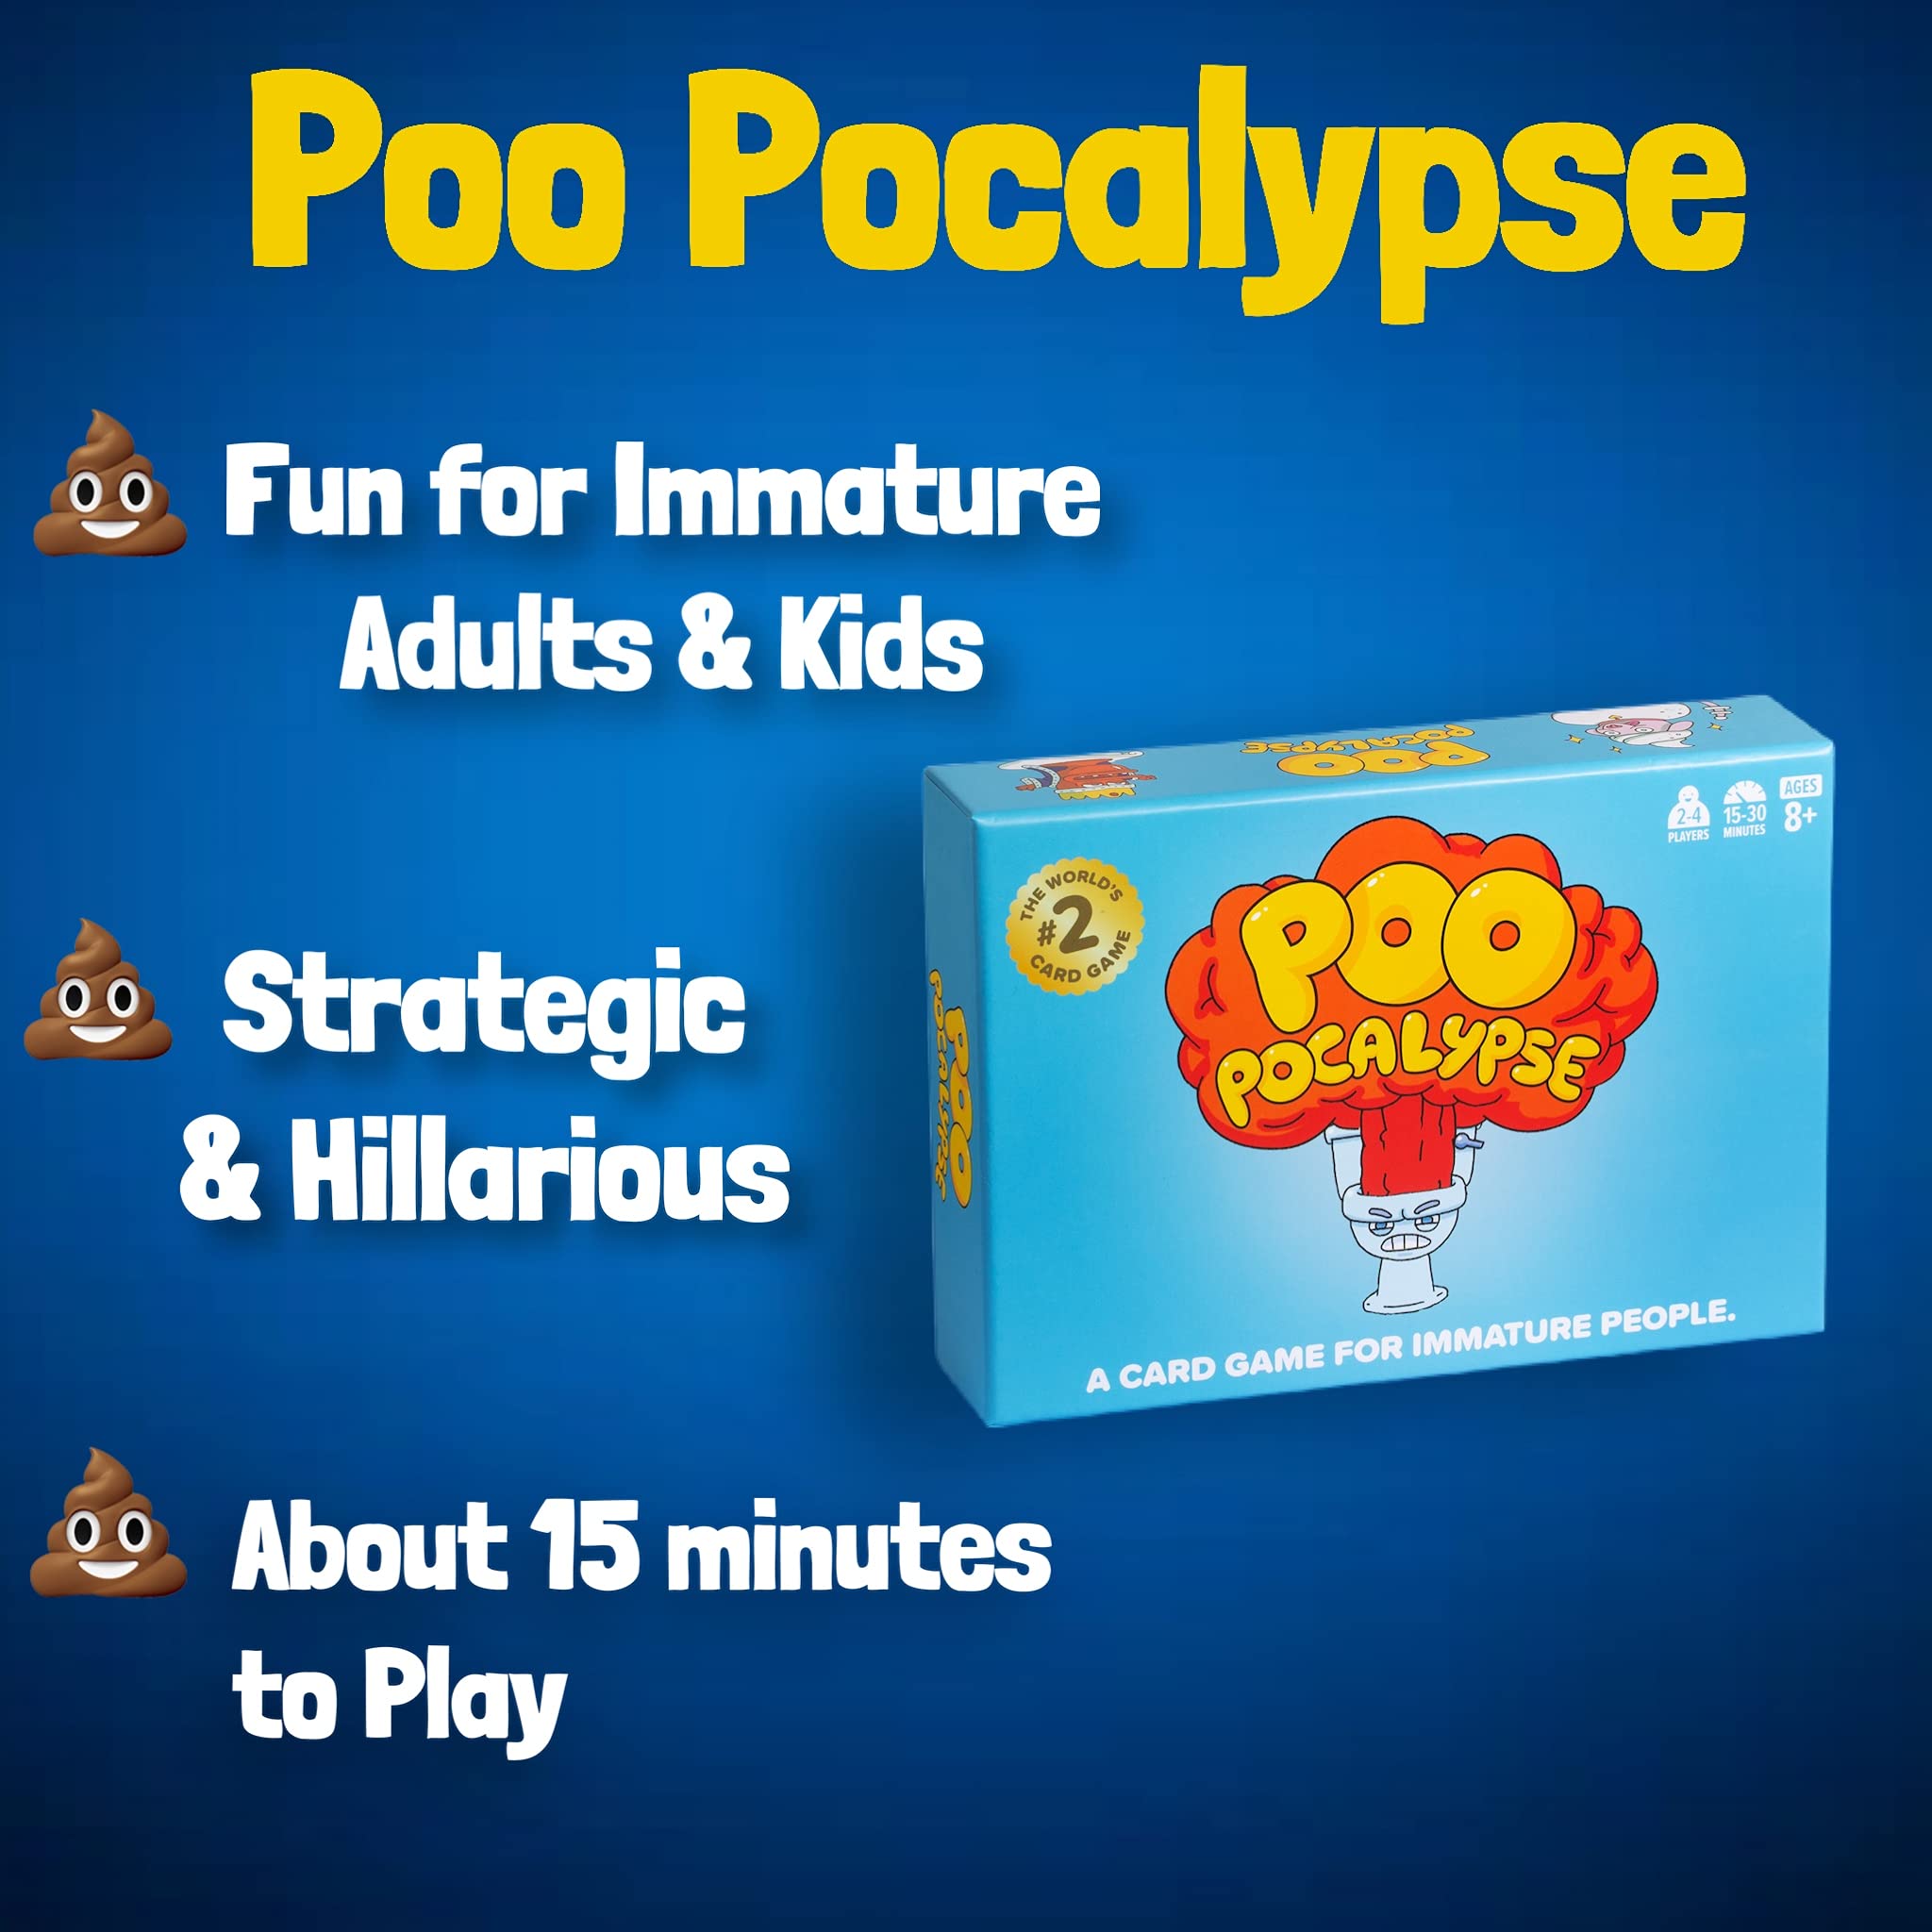 Poo Pocalypse Card Game + Expansions Bundle - The Hilarious Family Party Game for Kids, Teens, and Adults - 2-8 Players